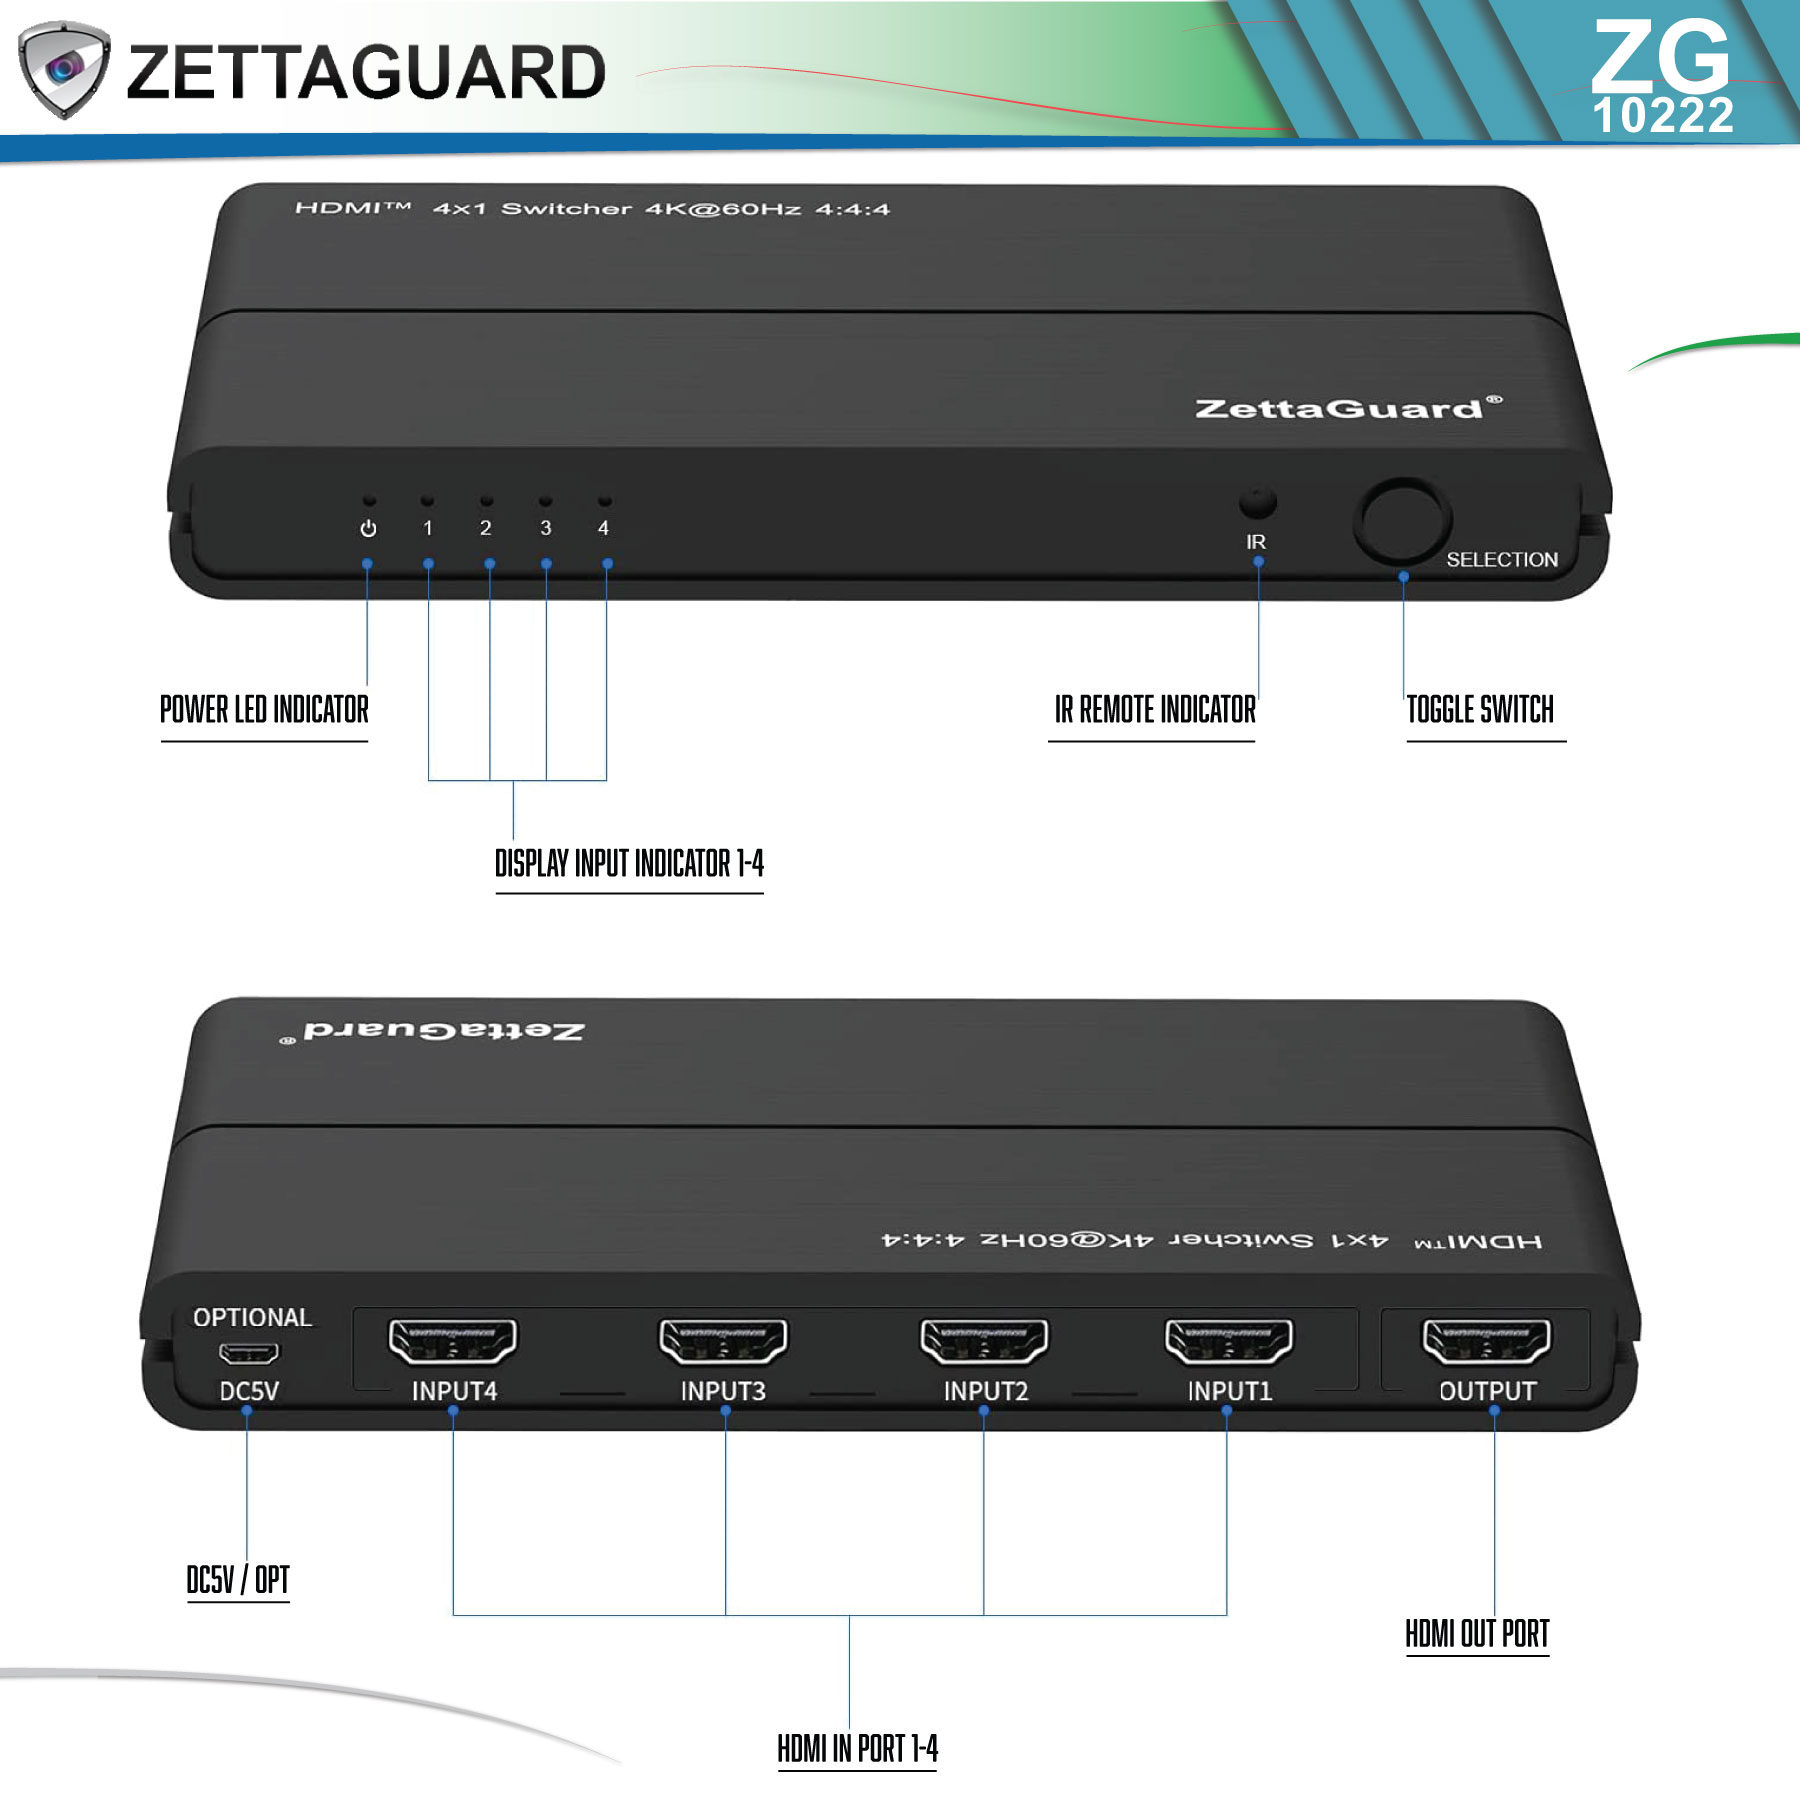 Zettaguard HDMI 2.0 Switcher Supports 4K HDR 4 Ports Hi-Speed 18Gbps HDCP 2.2, Auto-switching, IR Remote - Compatible with Apple Tv, Roku, Xbox/PS4, Blu-Ray, Macbook, Laptop, PC, TV for Home or Office - image 5 of 10